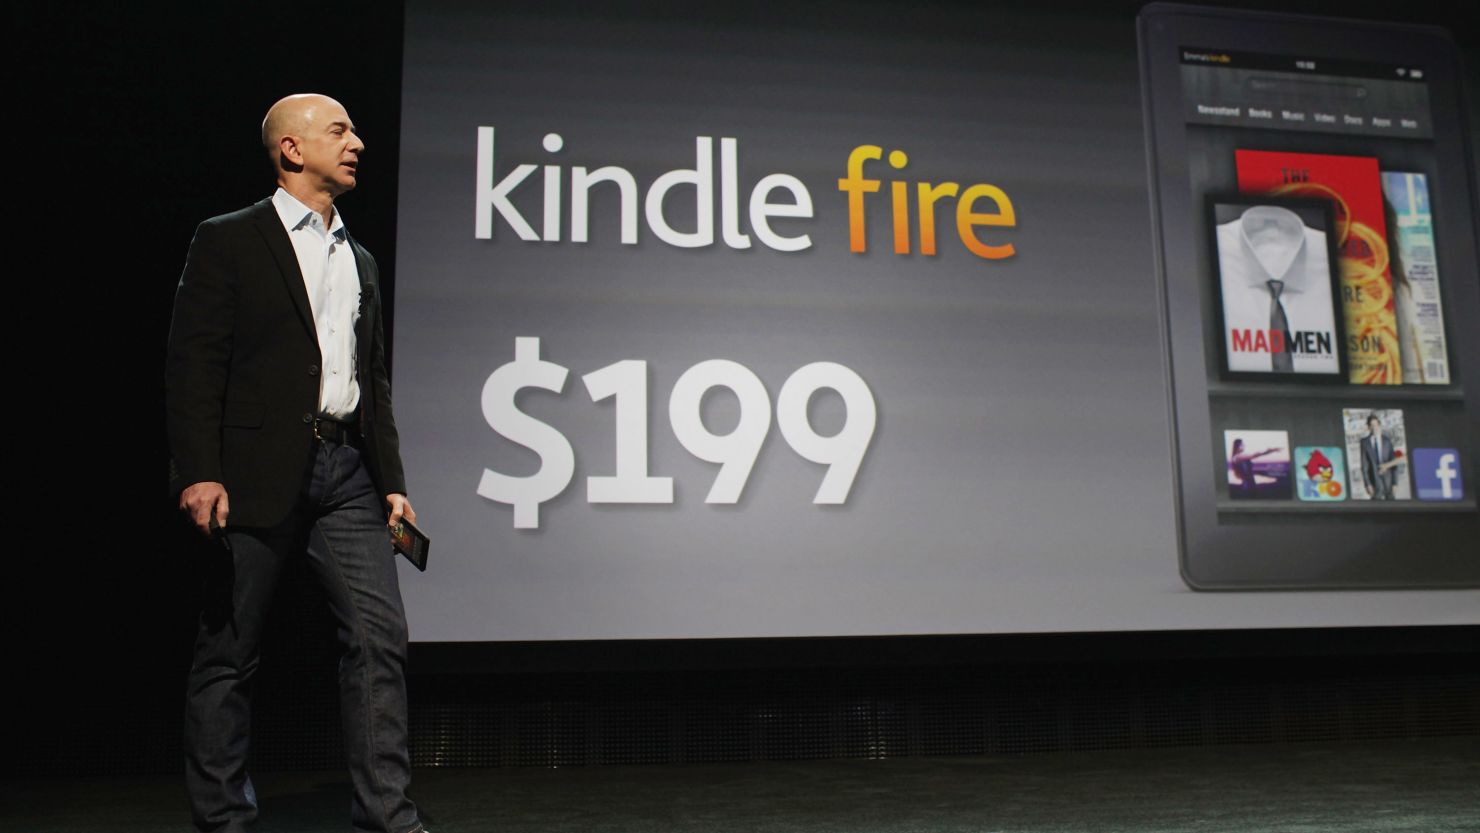 Amazon CEO Jeff Bezos surprises the crowd at the Kindle Fire announcement in September with a low $199 price tag.